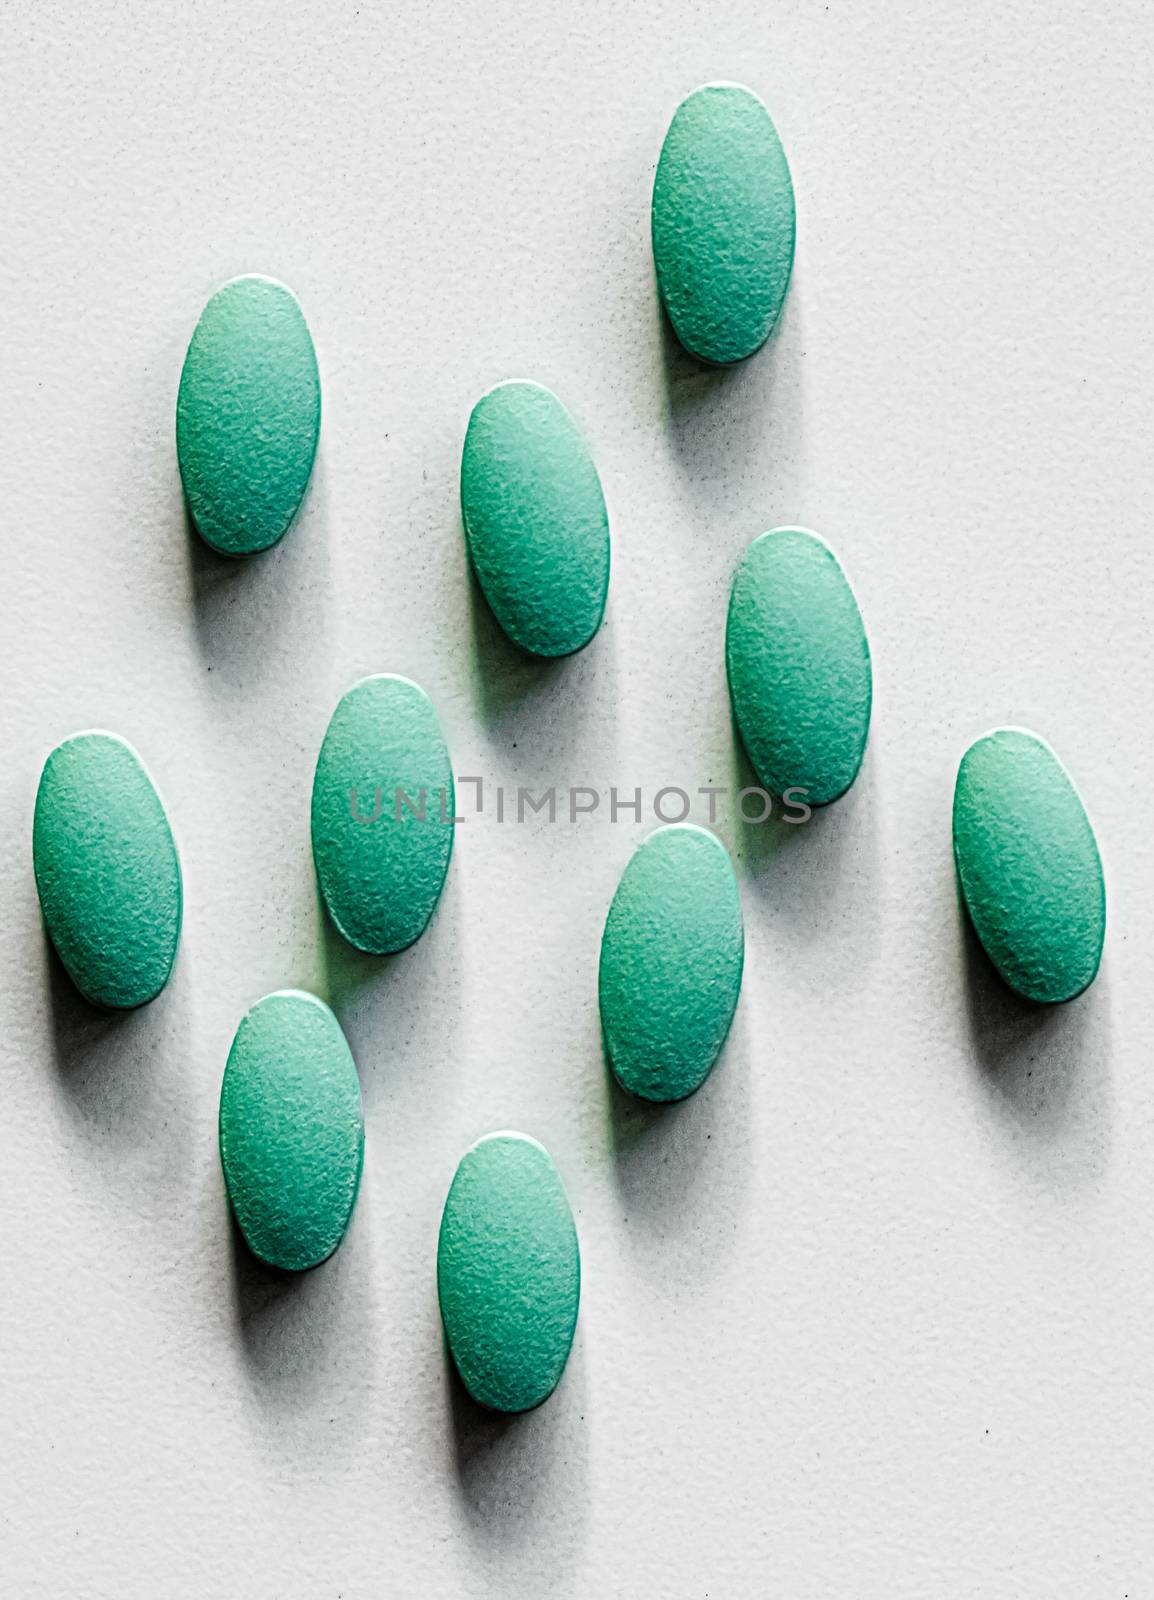 Mint pills as herbal medication, pharma brand store, probiotic drugs as nutrition healthcare or diet supplement products for pharmaceutical industry ads